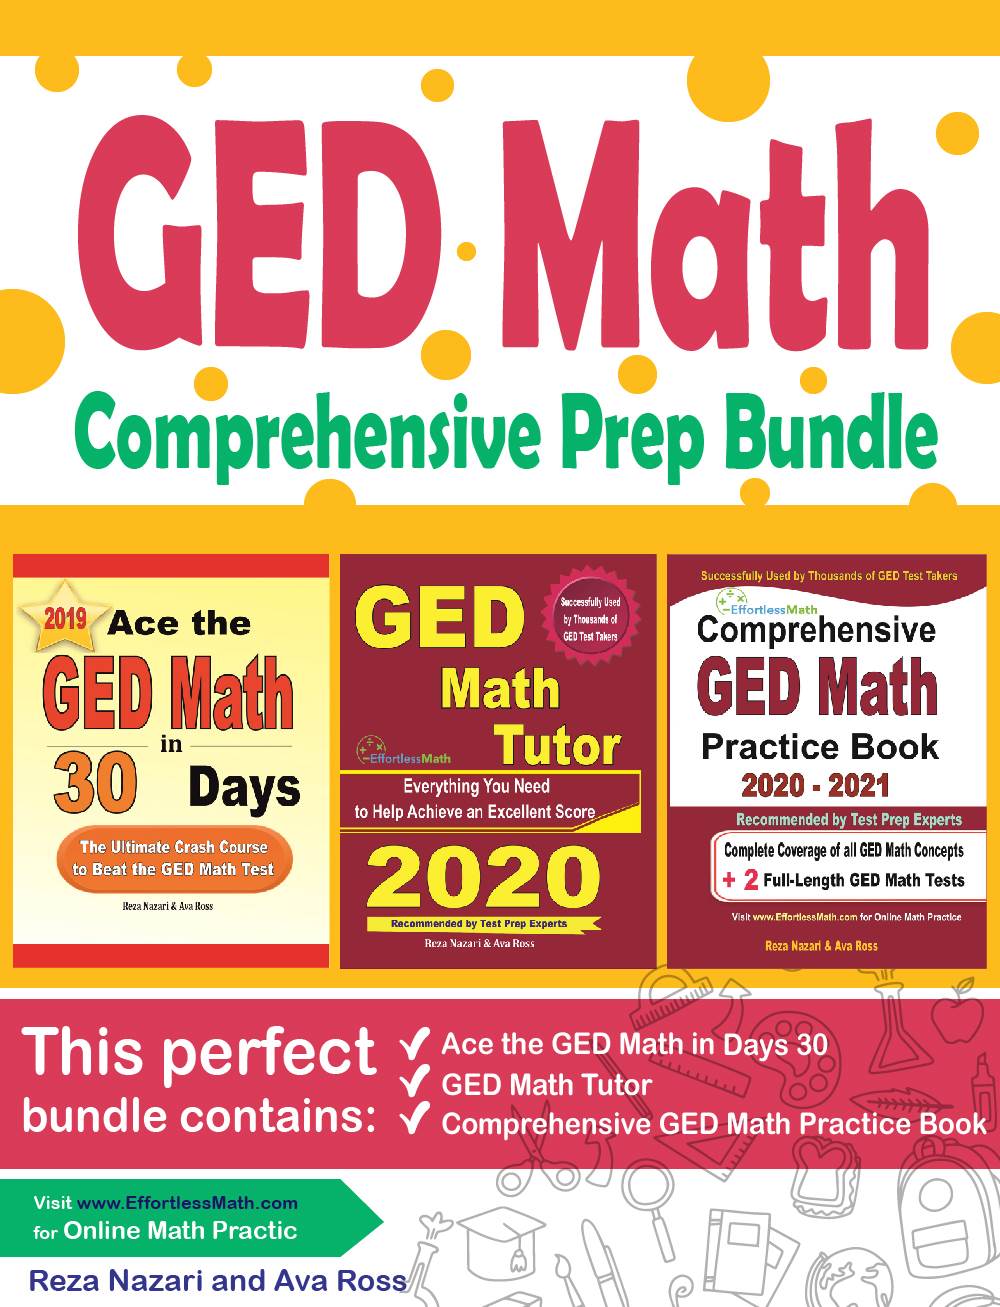 GED Math Comprehensive Prep Bundle: Everything You Need to Ace the GED Math Test